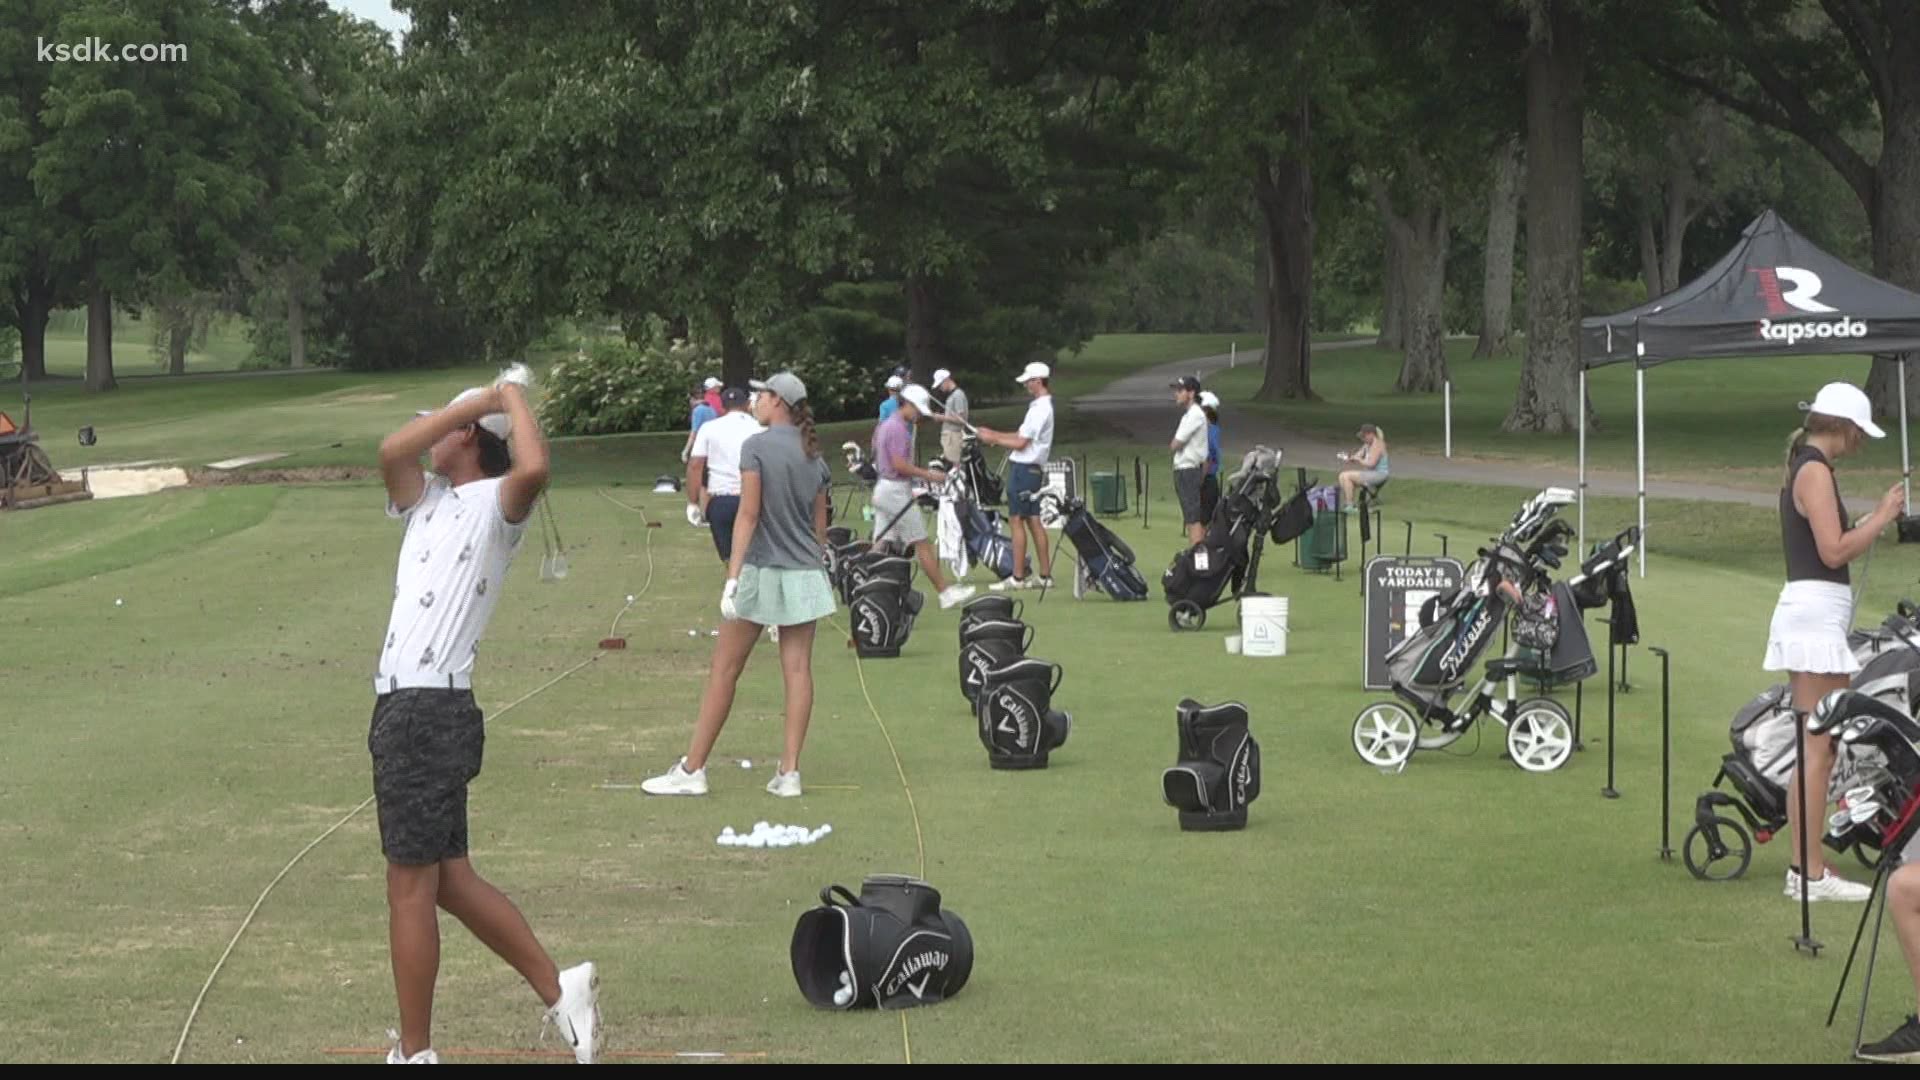 About 90 of the best youth golfers in the area showed up to compete.